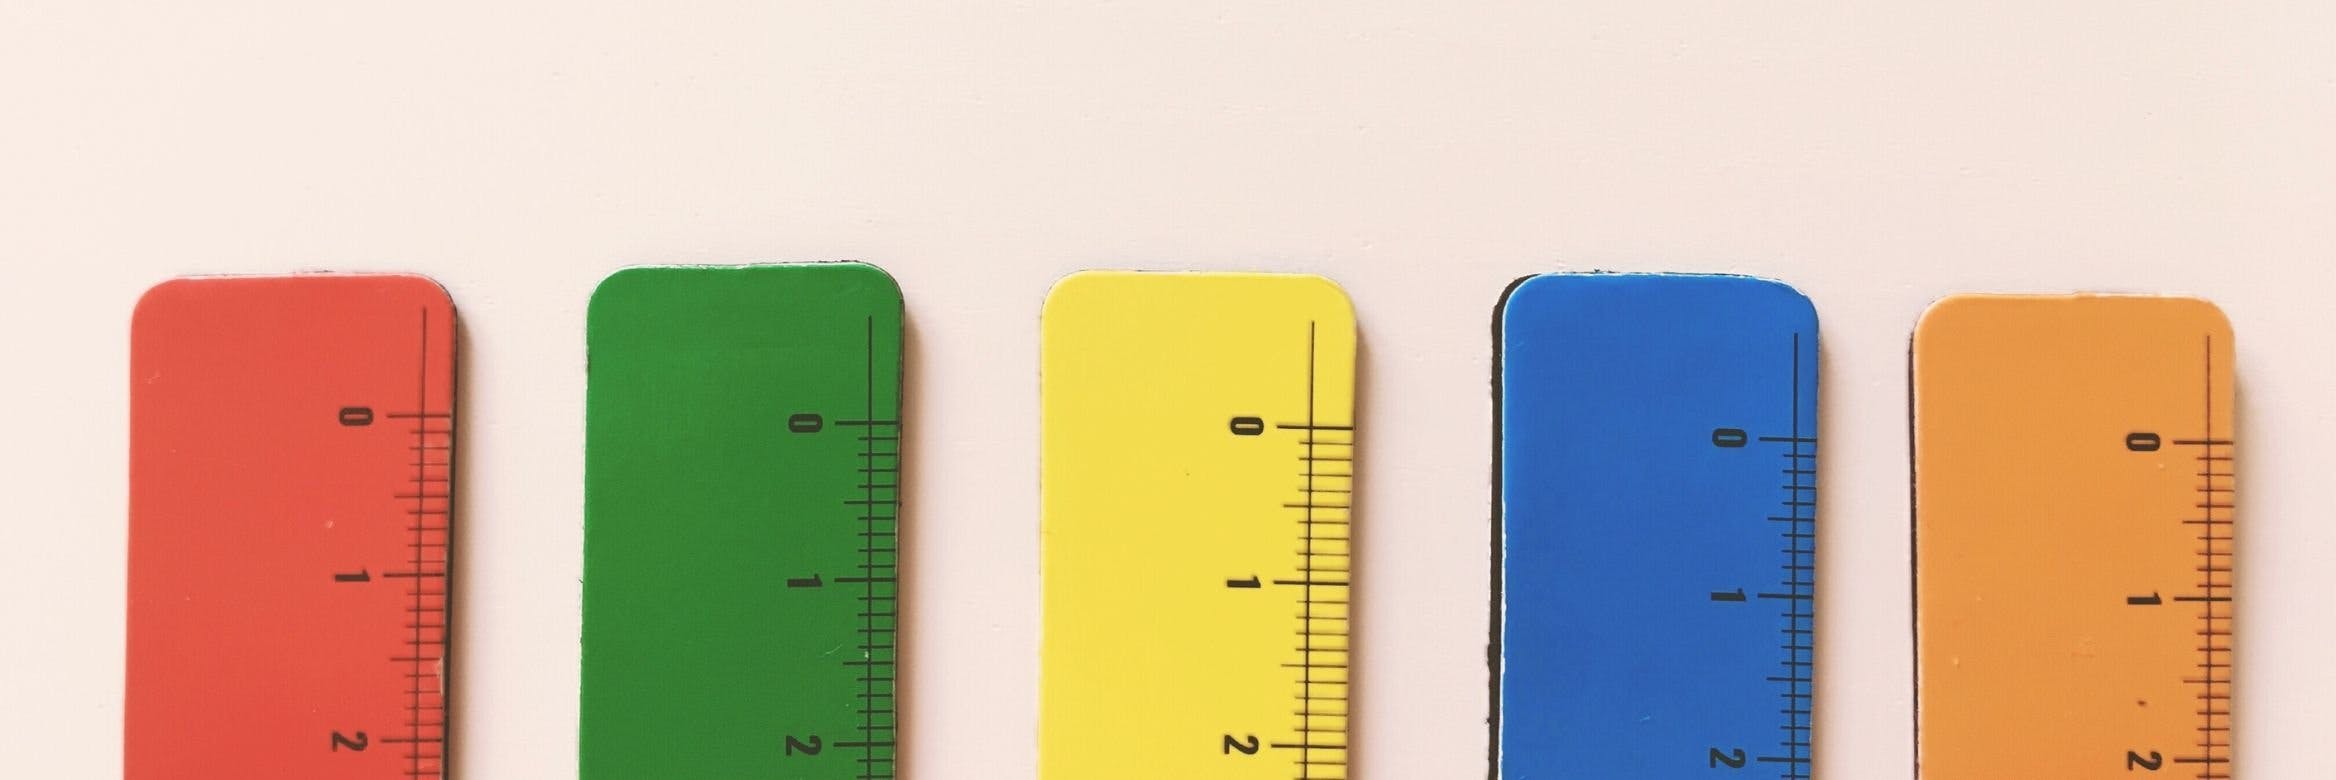 Do You Measure Up? Metrics for Enterprise SaaS Product Managers